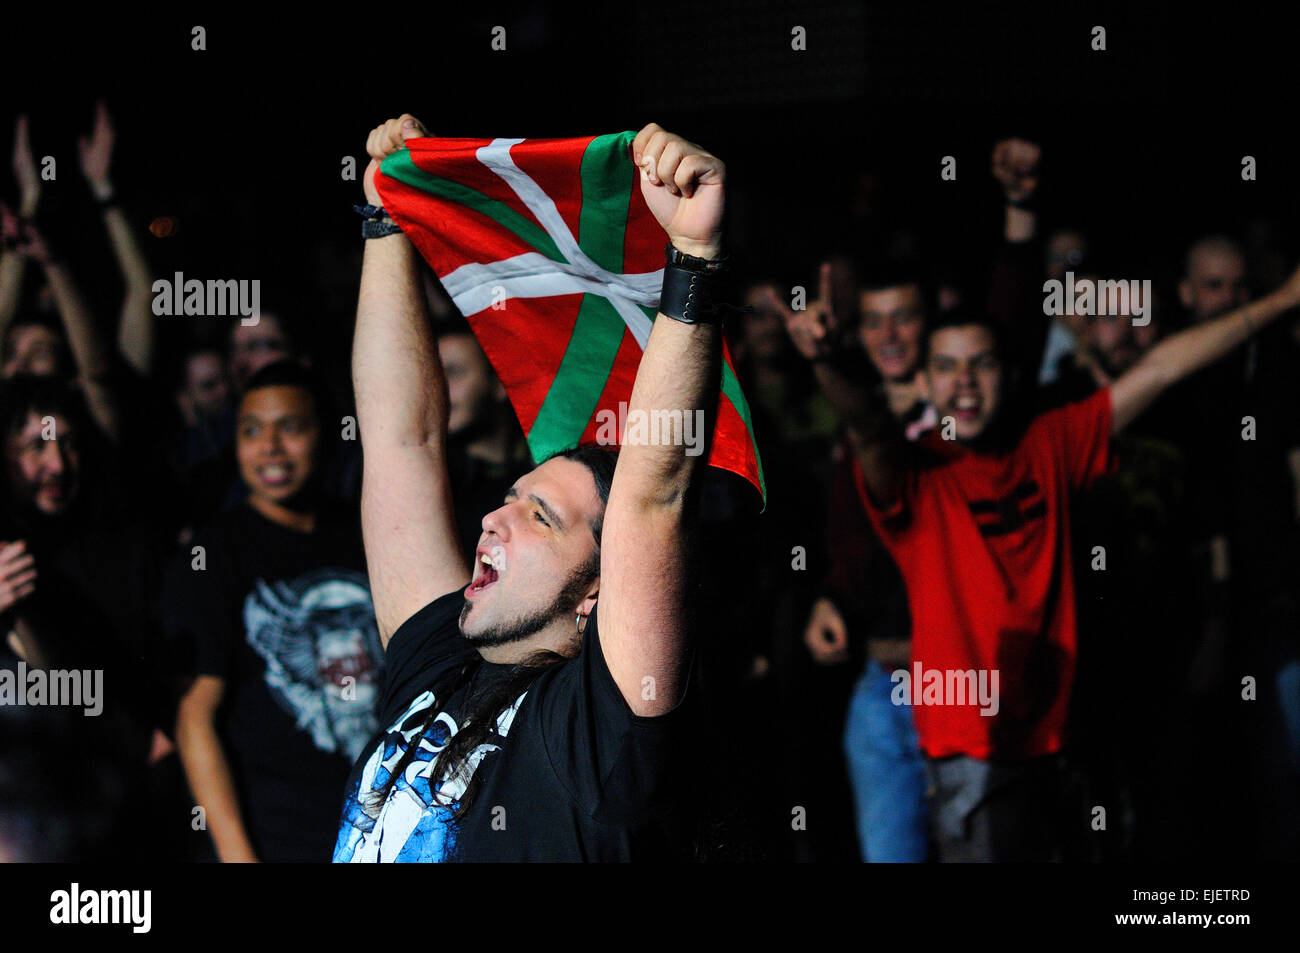 BARCELONA - FEB 5: Audience at a heavy metal show at Razzmatazz stage on February 5, 2011 in Barcelona, Spain. Stock Photo